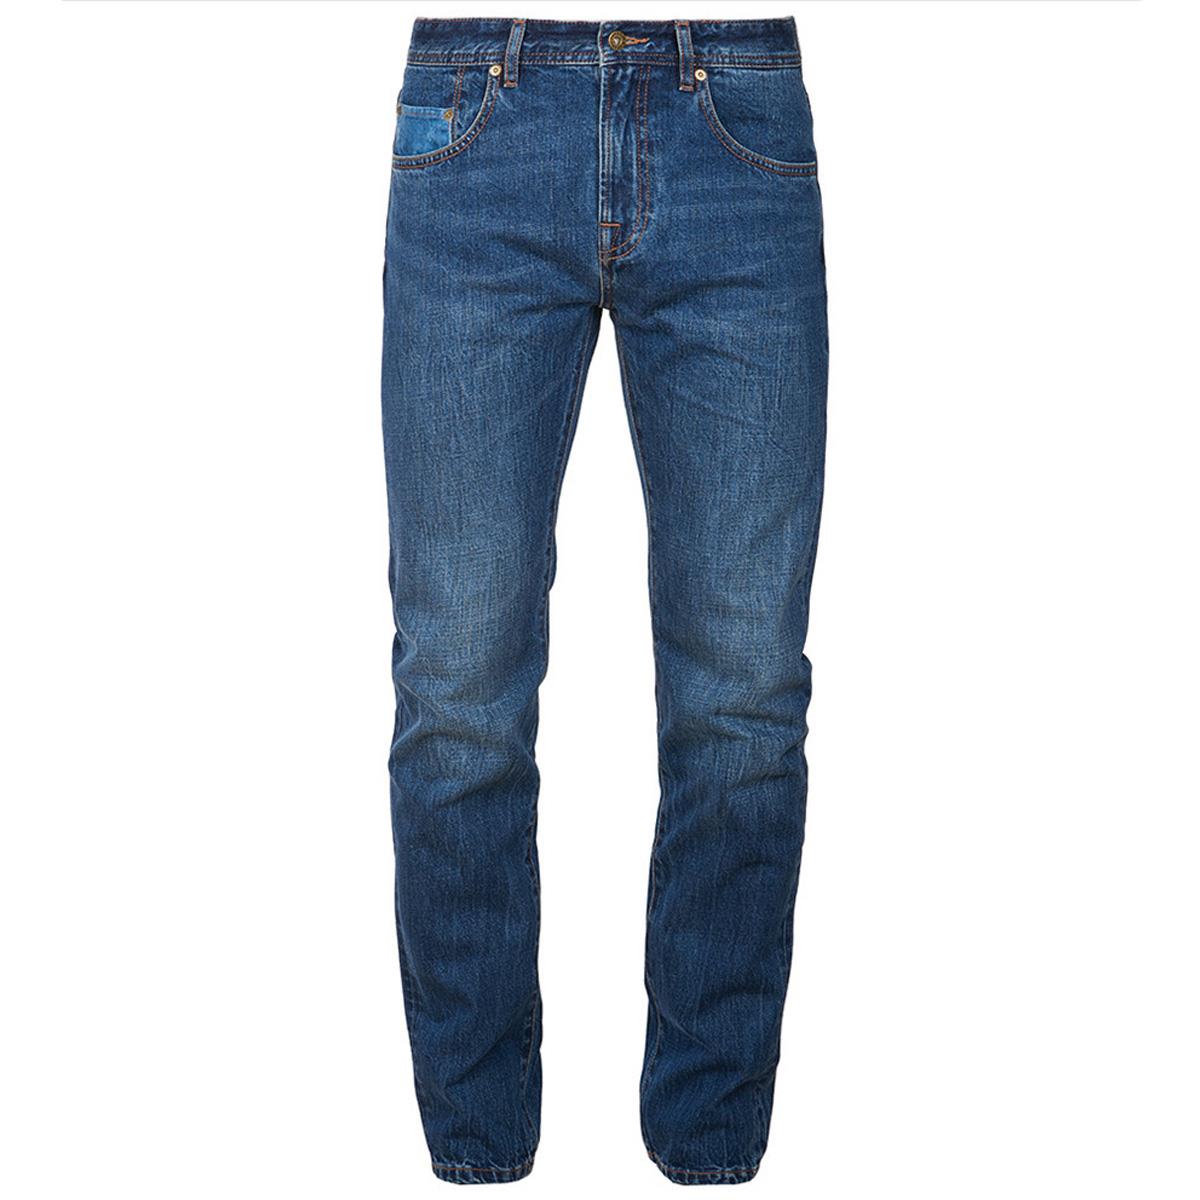 What colors are available for Barbour mens jeans?